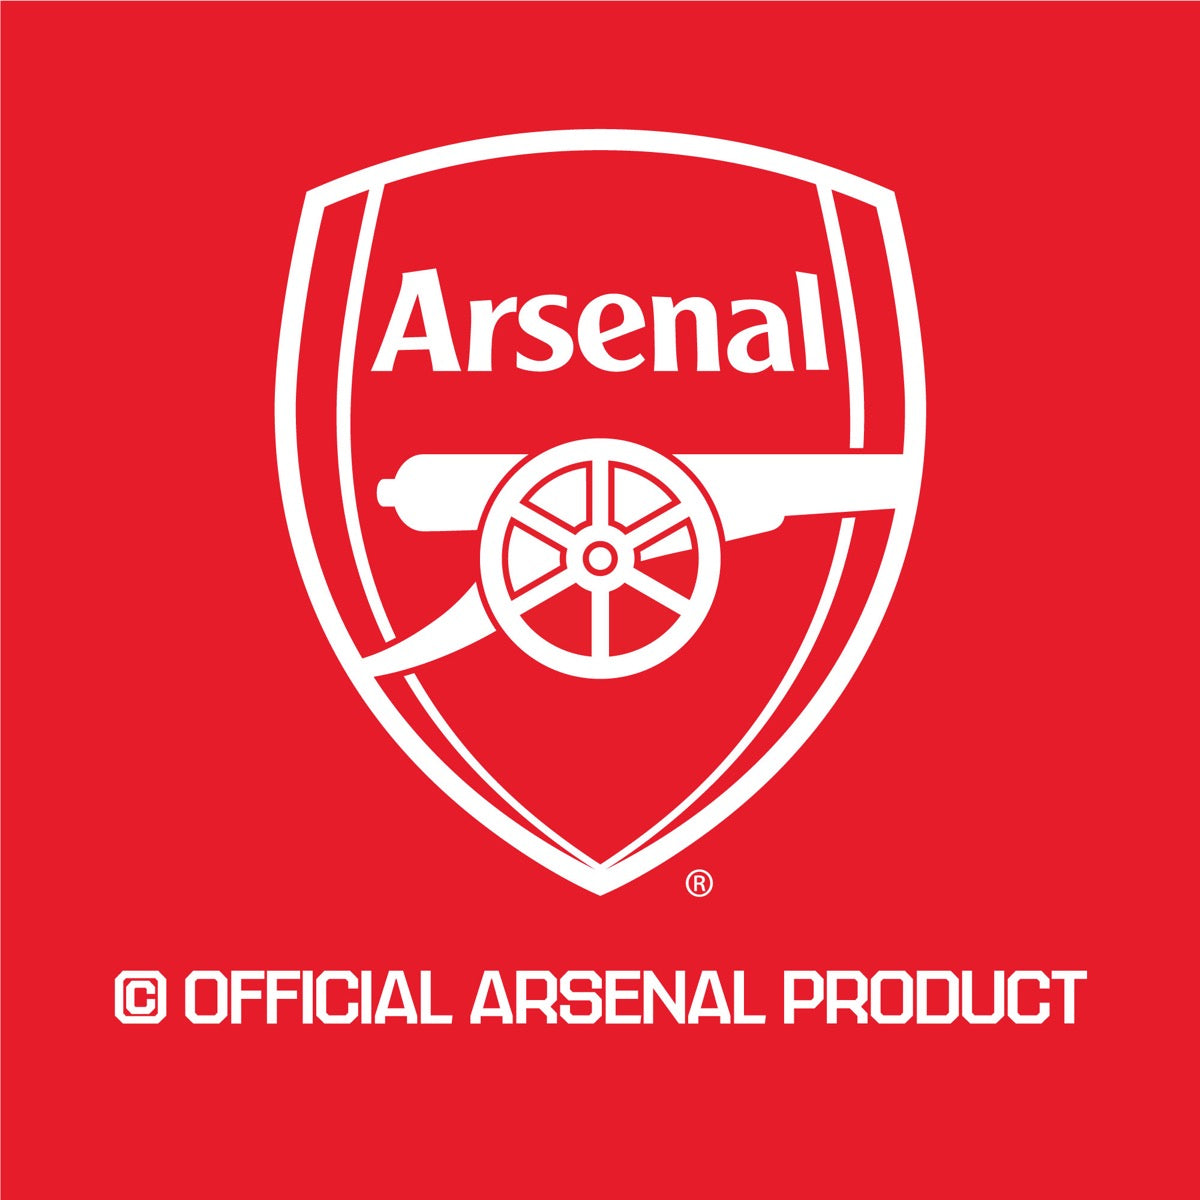 Arsenal FC - Alessia Russo 23-24 Player Wall Sticker + Gunners Decal Set